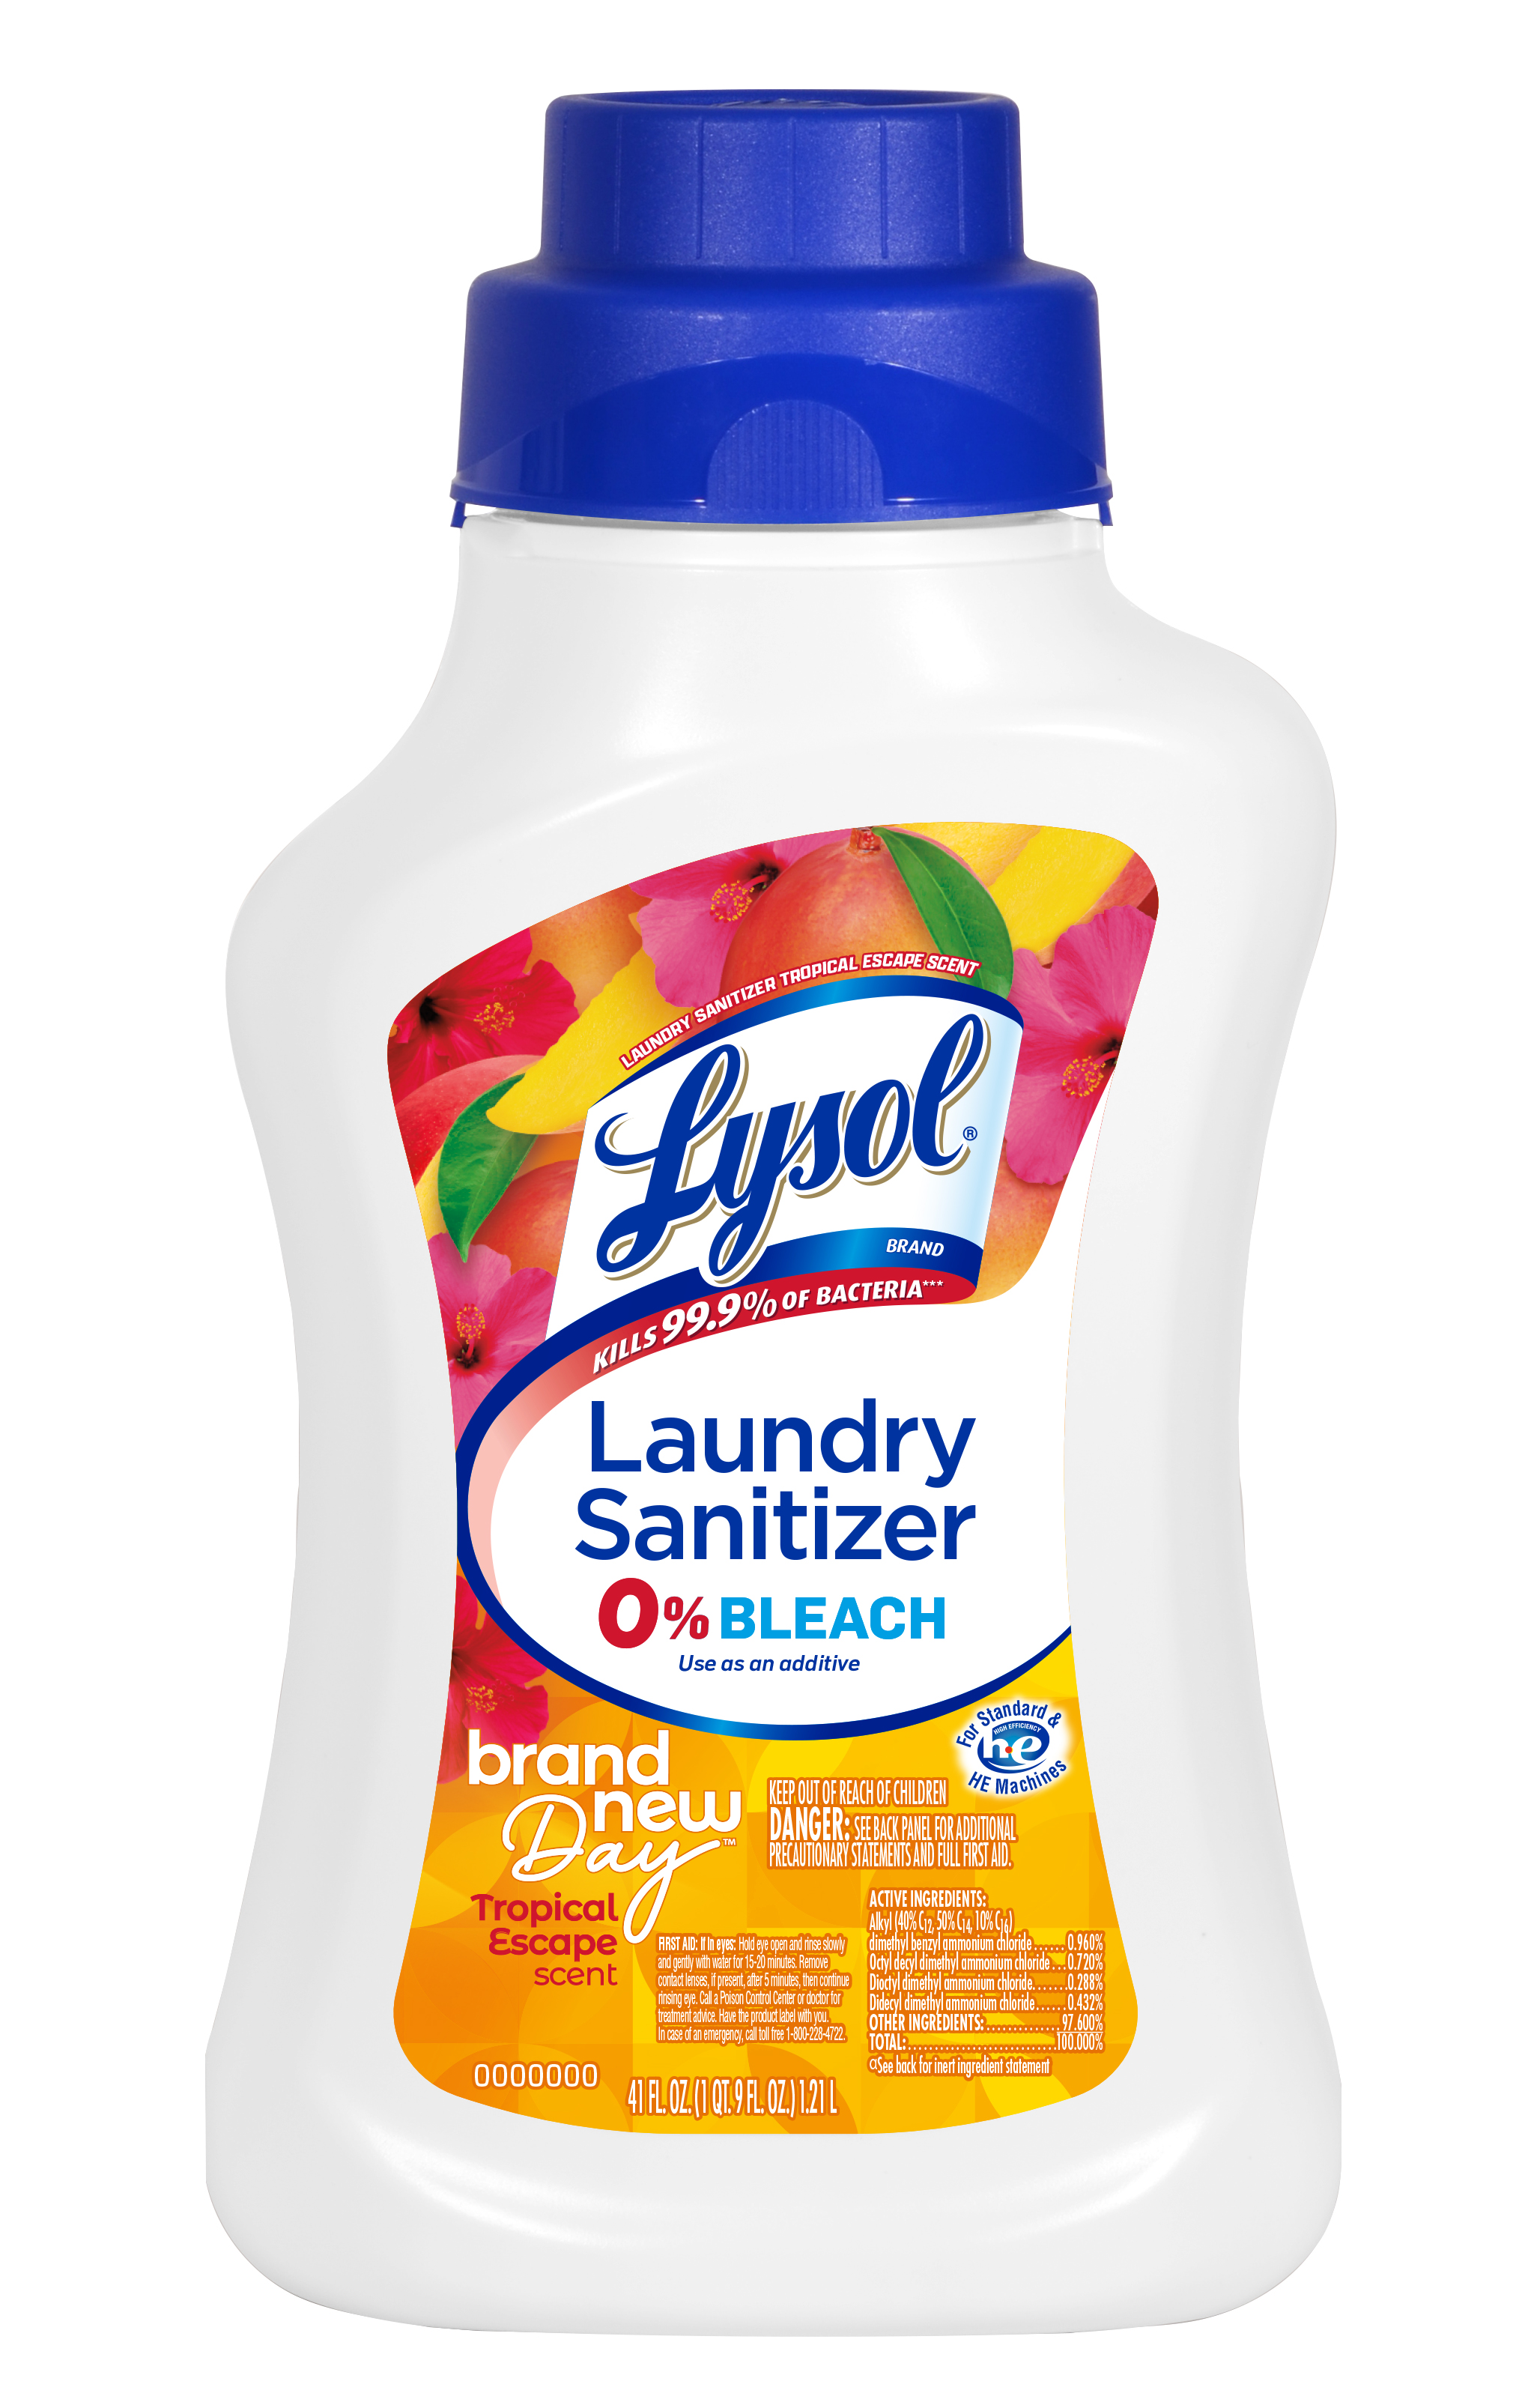 Lysol® Laundry Sanitizer Brand New Day™ Tropical Escape